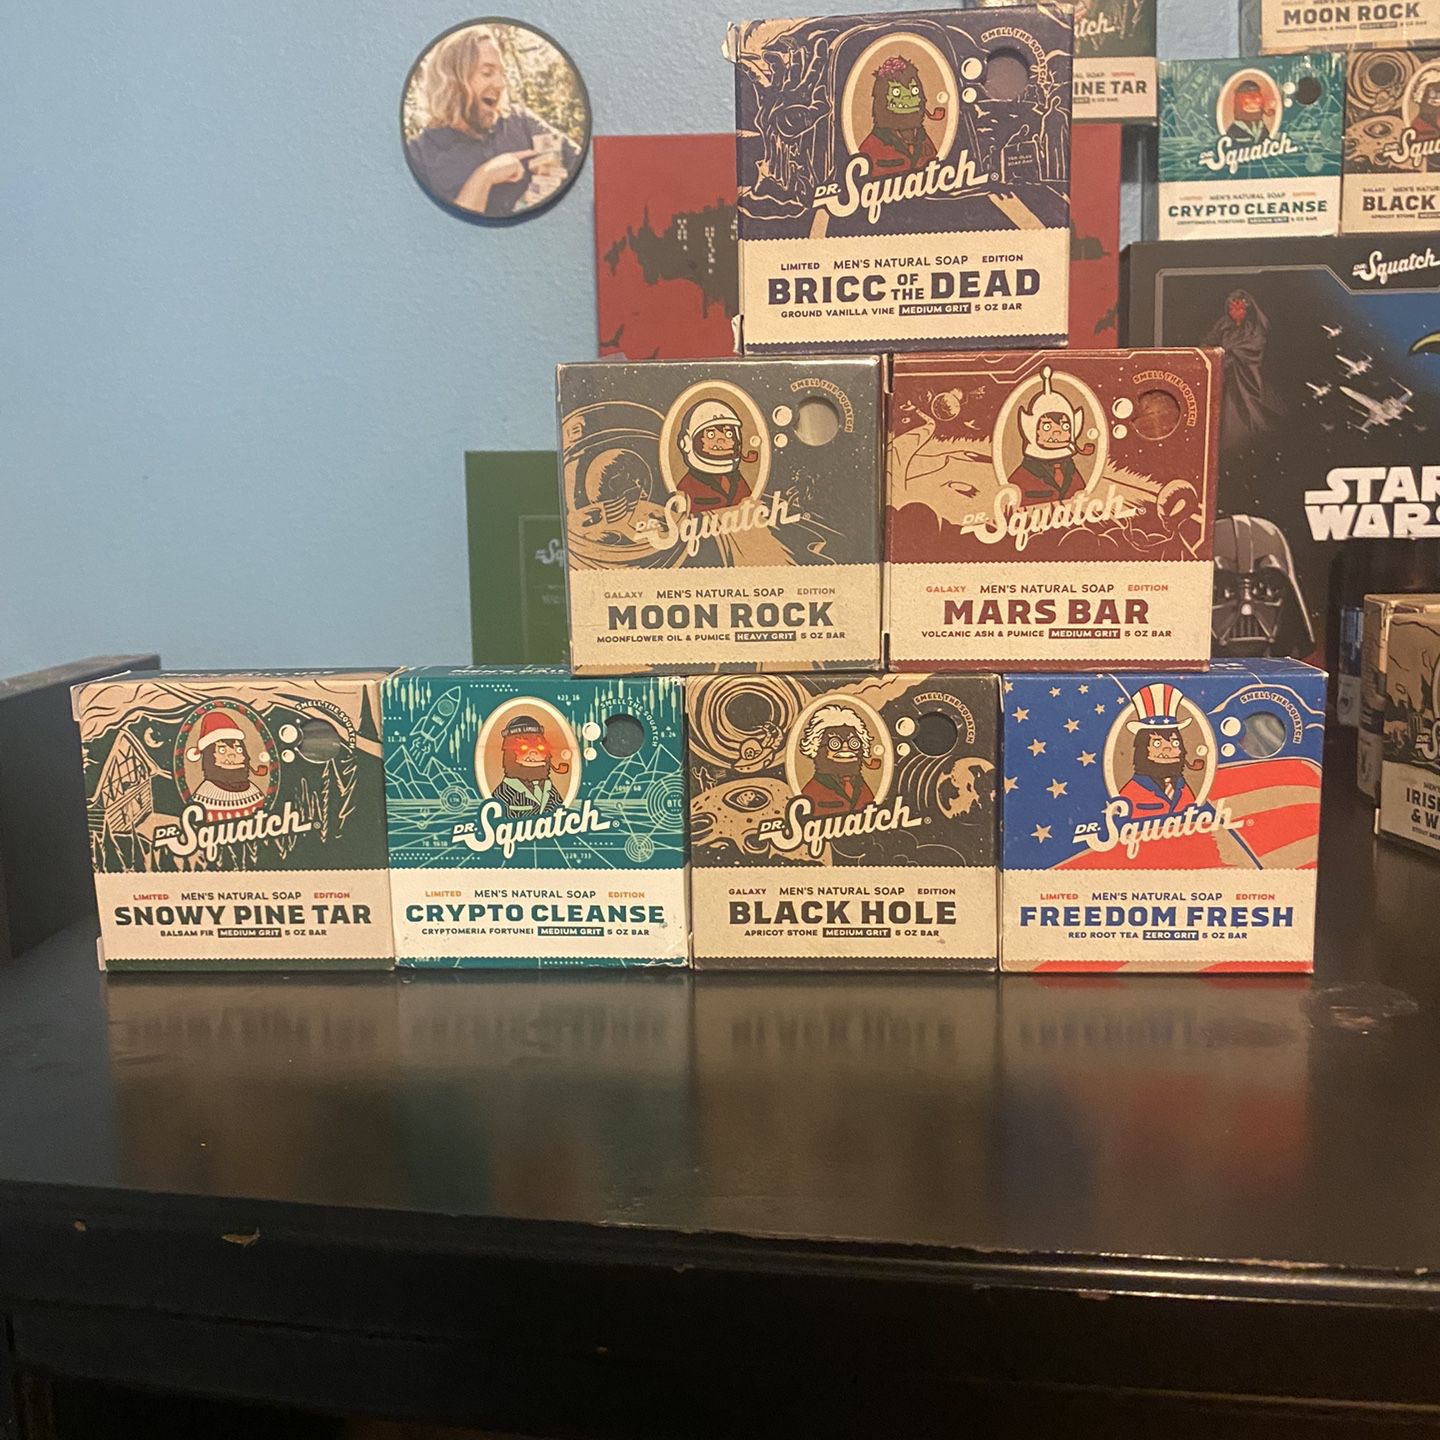 Dr. Squatch Bricc of the Dead Soap & Star Wars Set! 